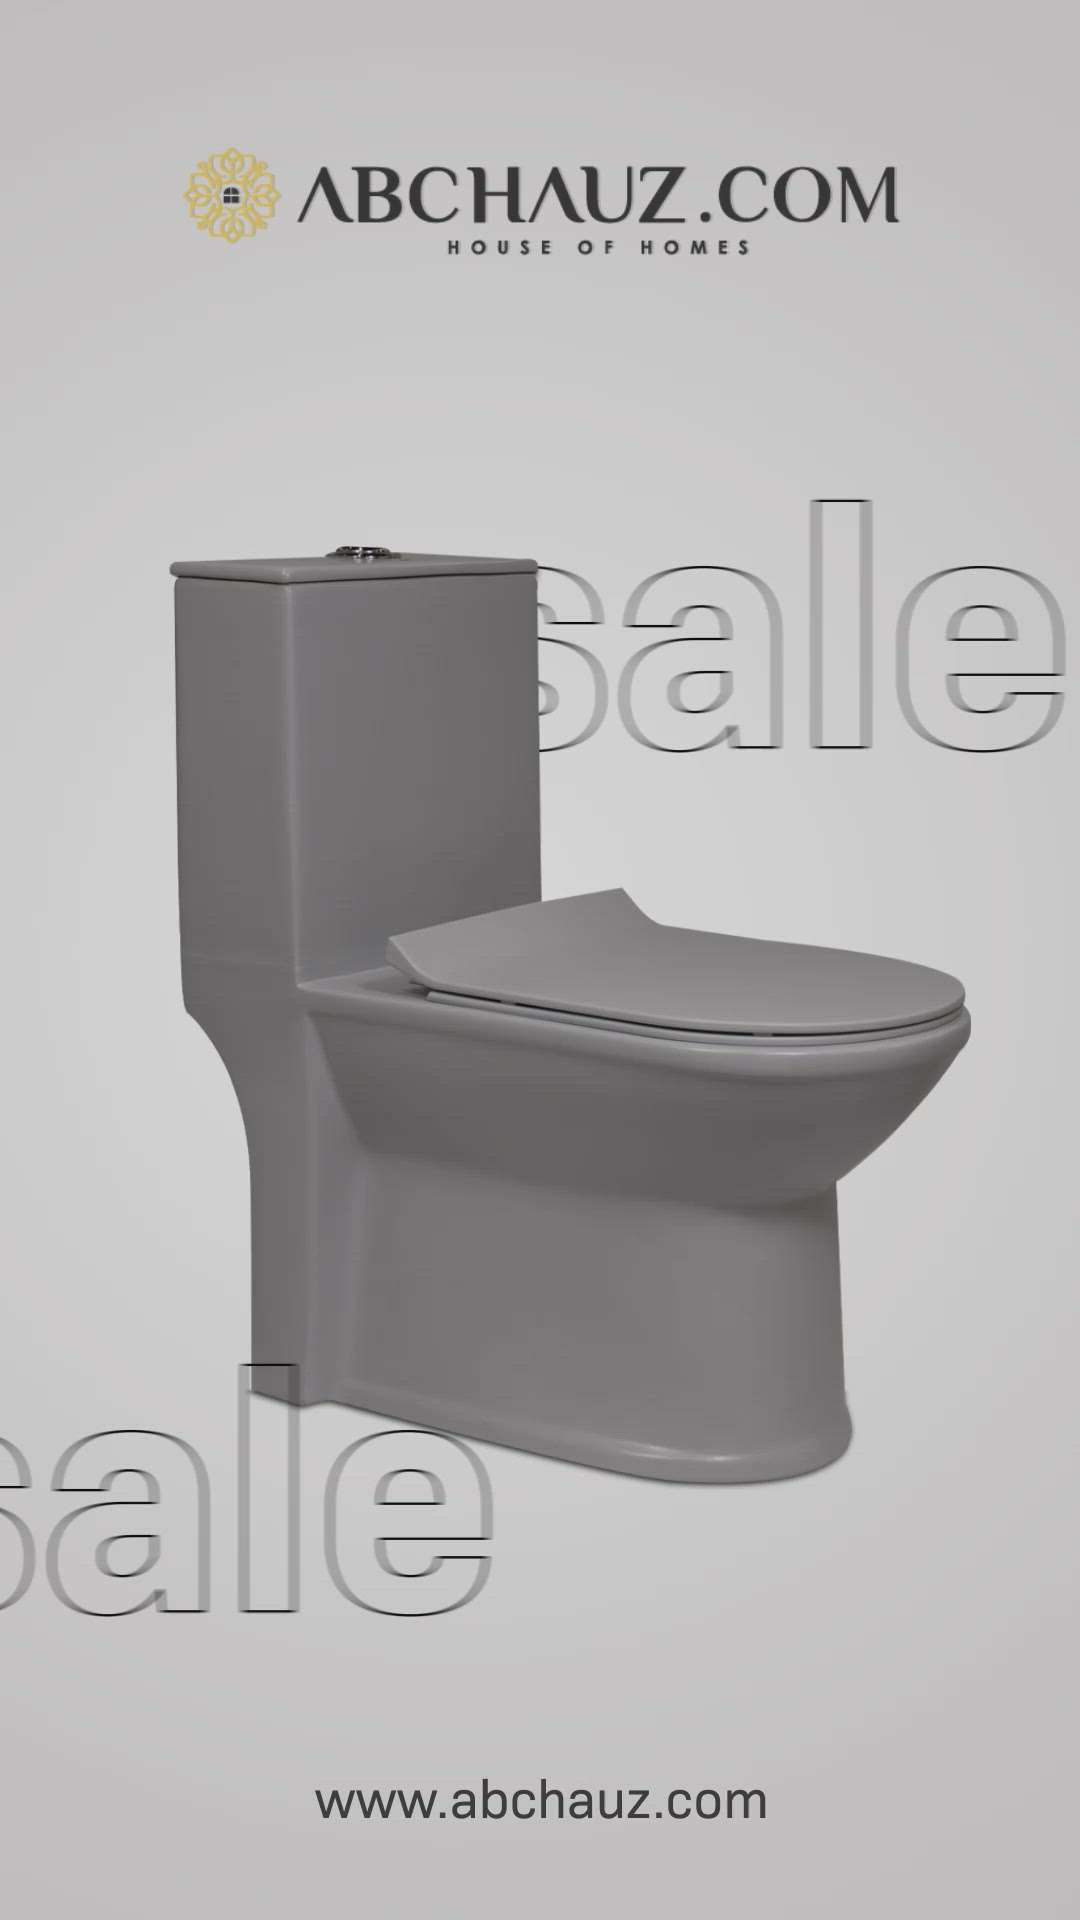 Upgrade Your Bathroom with One-Piece Toilets.

Shop Now: https://bit.ly/43xGhfJ
For more details, comment or message us.

#abchauzindia #ABCGroup #homeconstruction #toilets #sanitarywares #bathroomfittings #bathroomrenovation #bathroomdesign